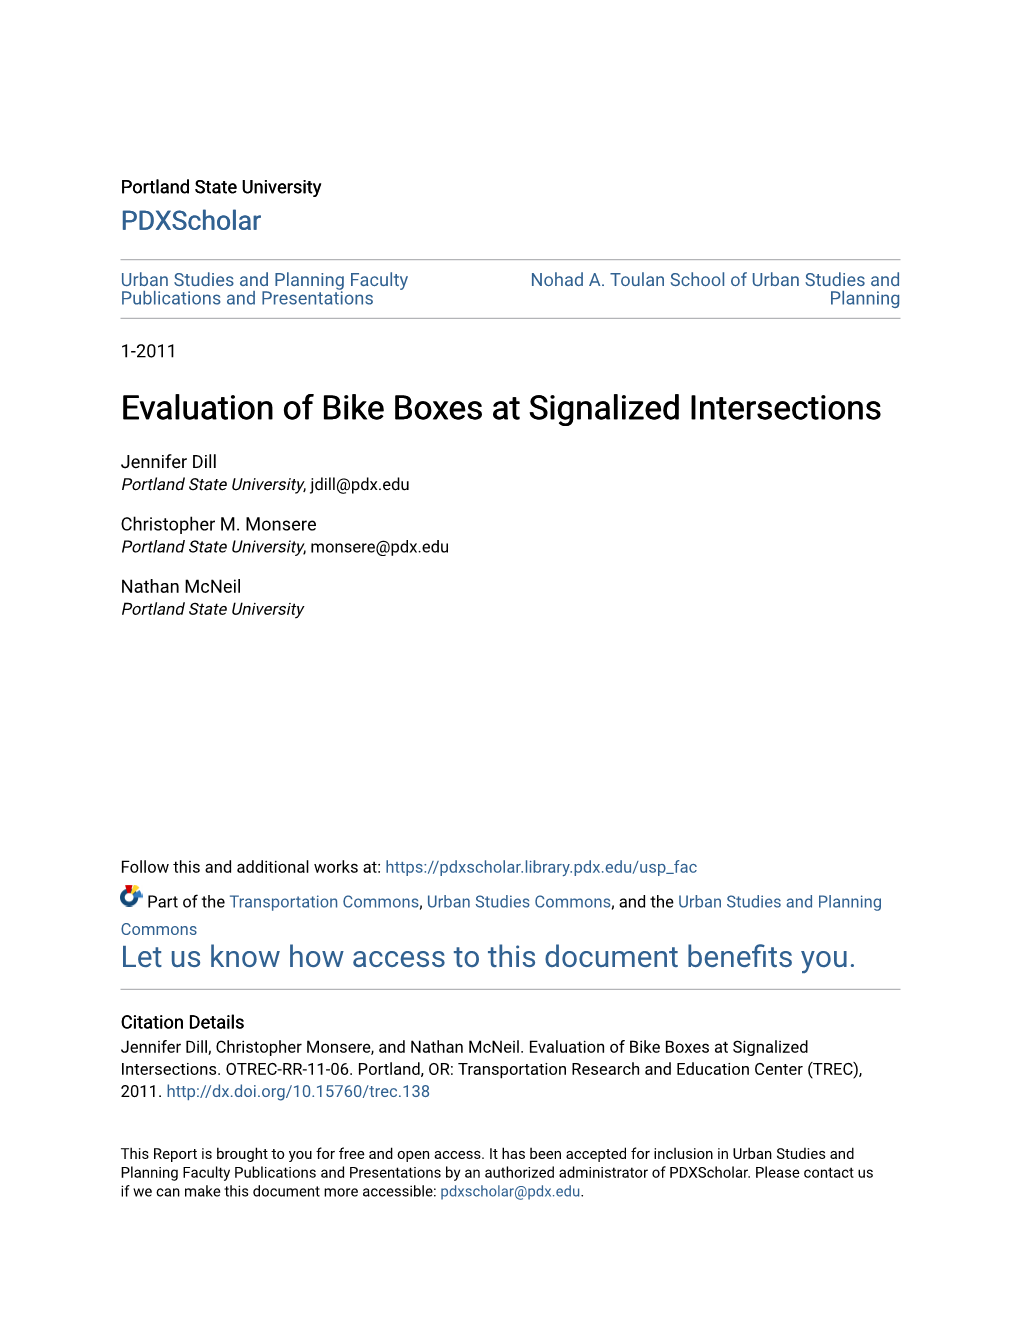 Evaluation of Bike Boxes at Signalized Intersections